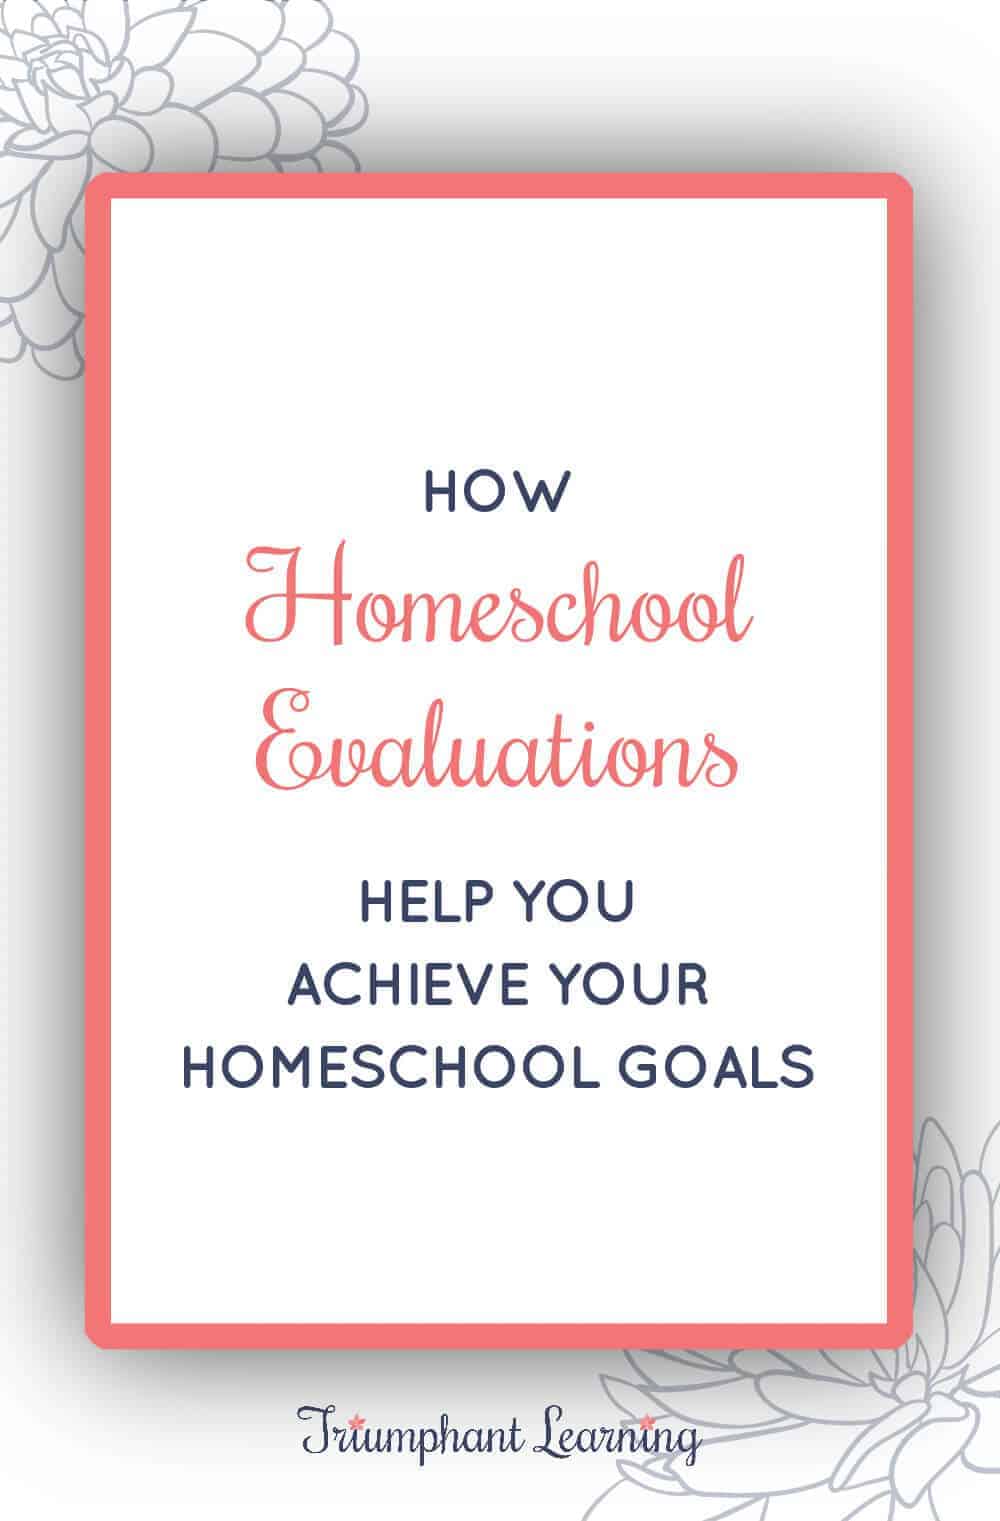 Learn about the benefits of homeschool evaluations and how to make time to assess your homeschool progress. via @TriLearning